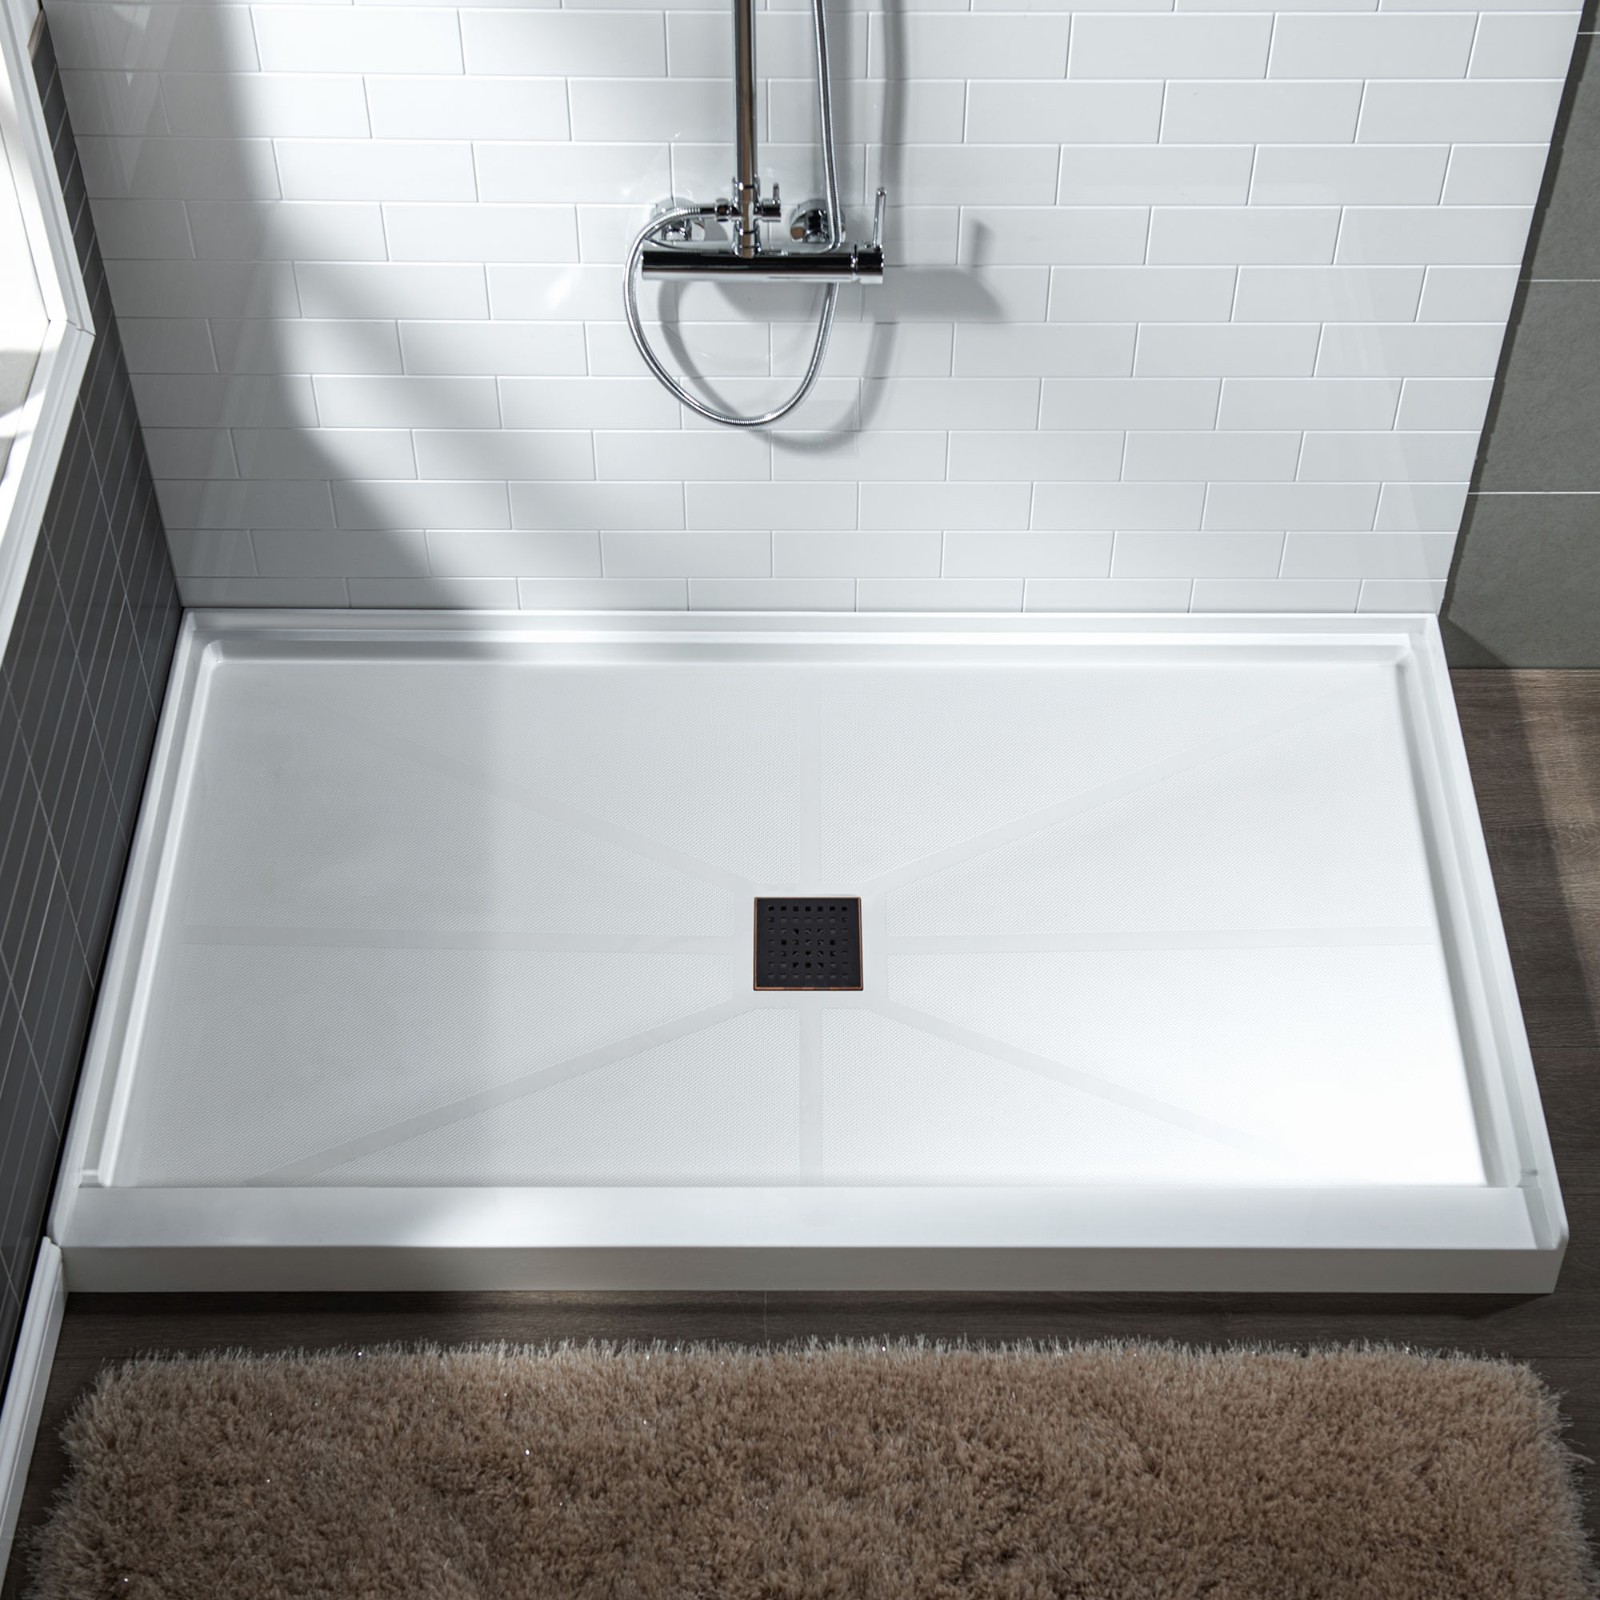  WOODBRIDGE SBR6032-1000C-ORB SolidSurface Shower Base with Recessed Trench Side Including Oil Rubbed Bronze Linear Cover, 60